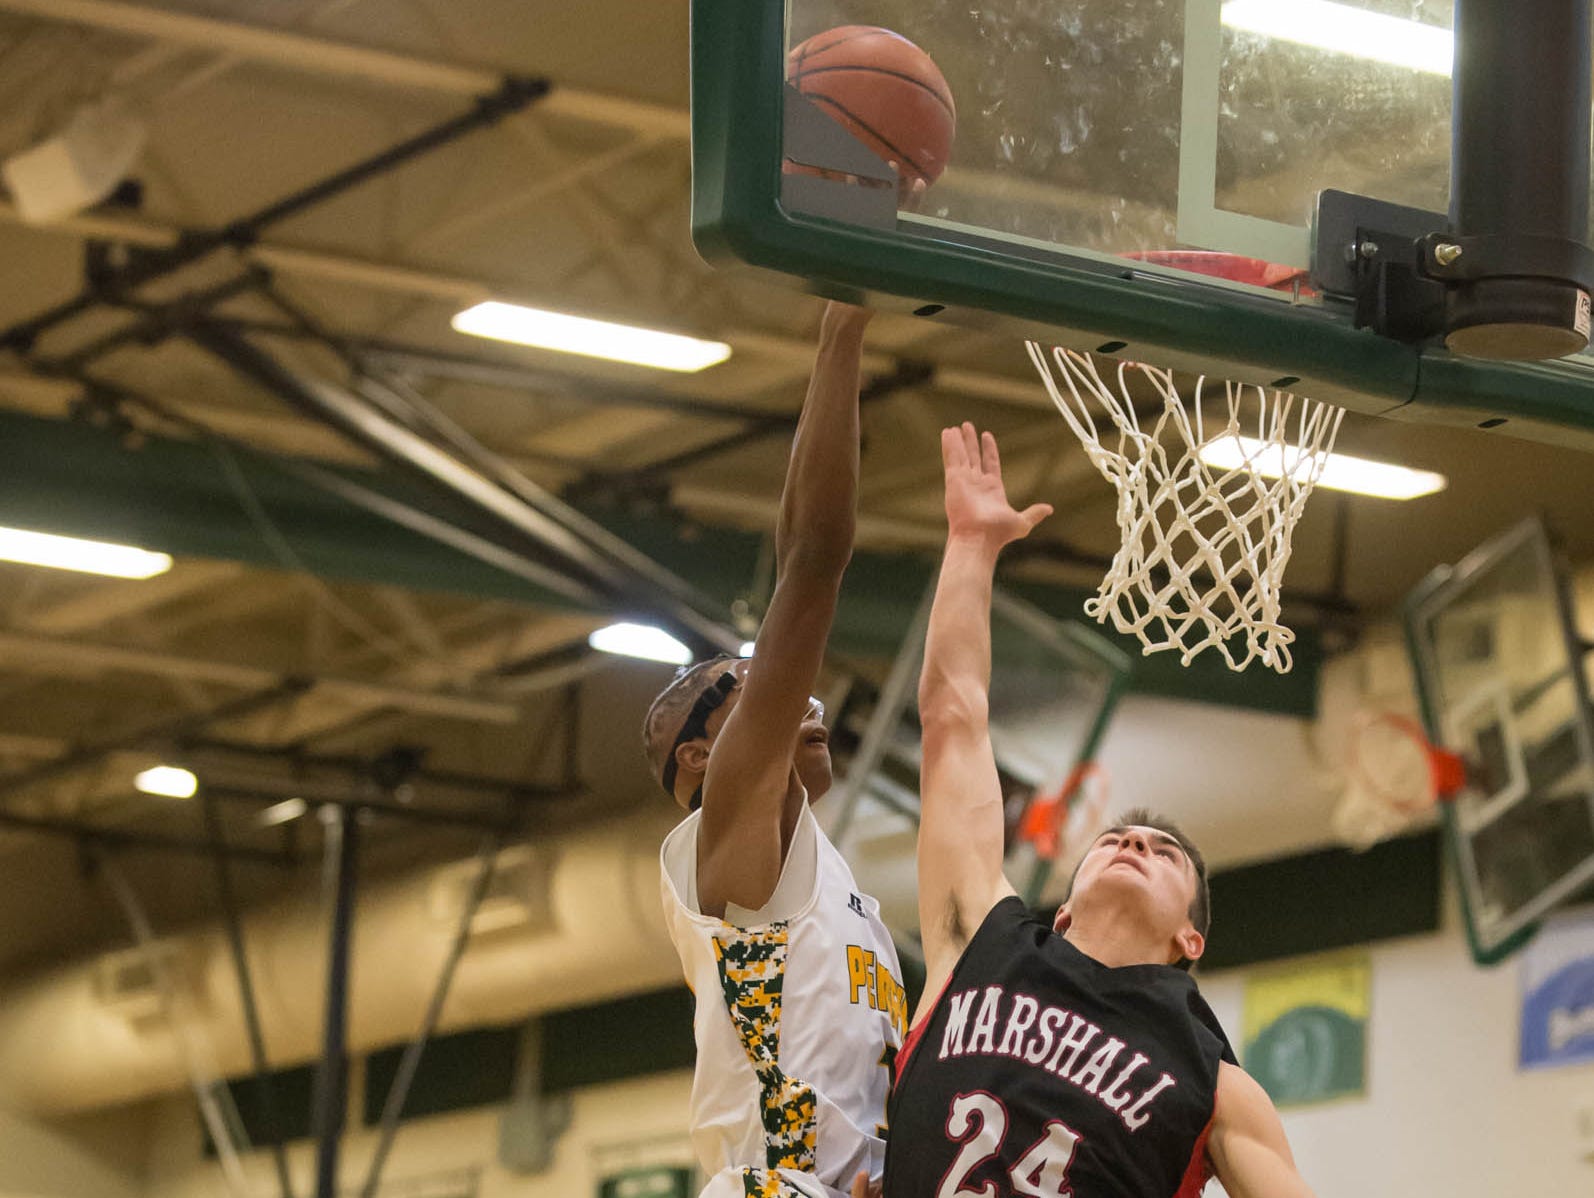 Marshall's Drew DeVine (24) defends as Pennfield's Francois Jamierson (11) goes for the hoop during Friday night's game.